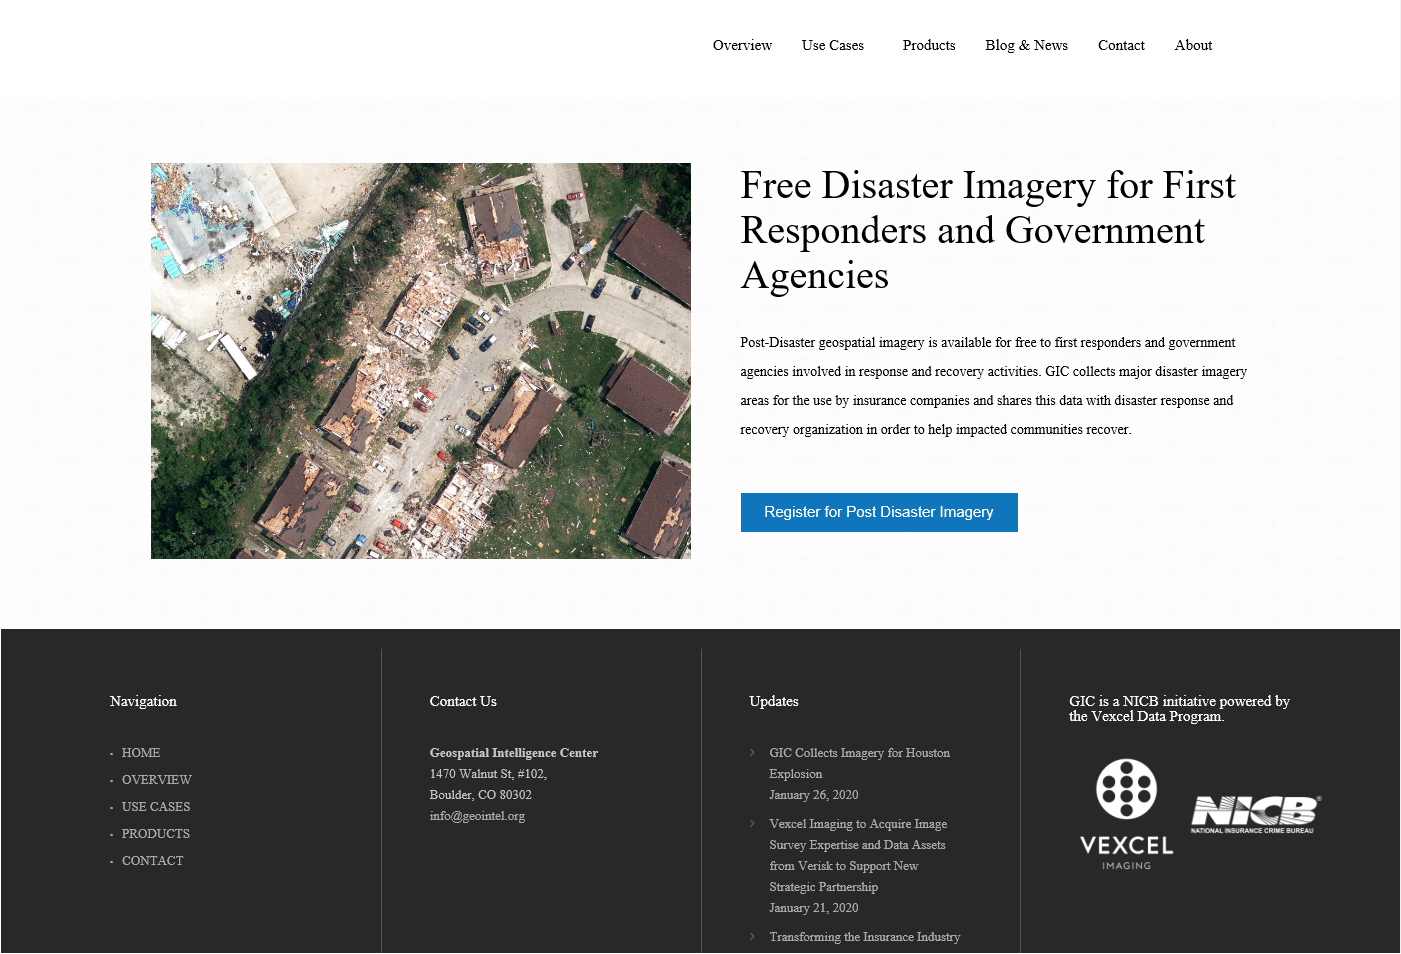 Website of post-disaster geospatial imagery available for free to first responders and government agencies.